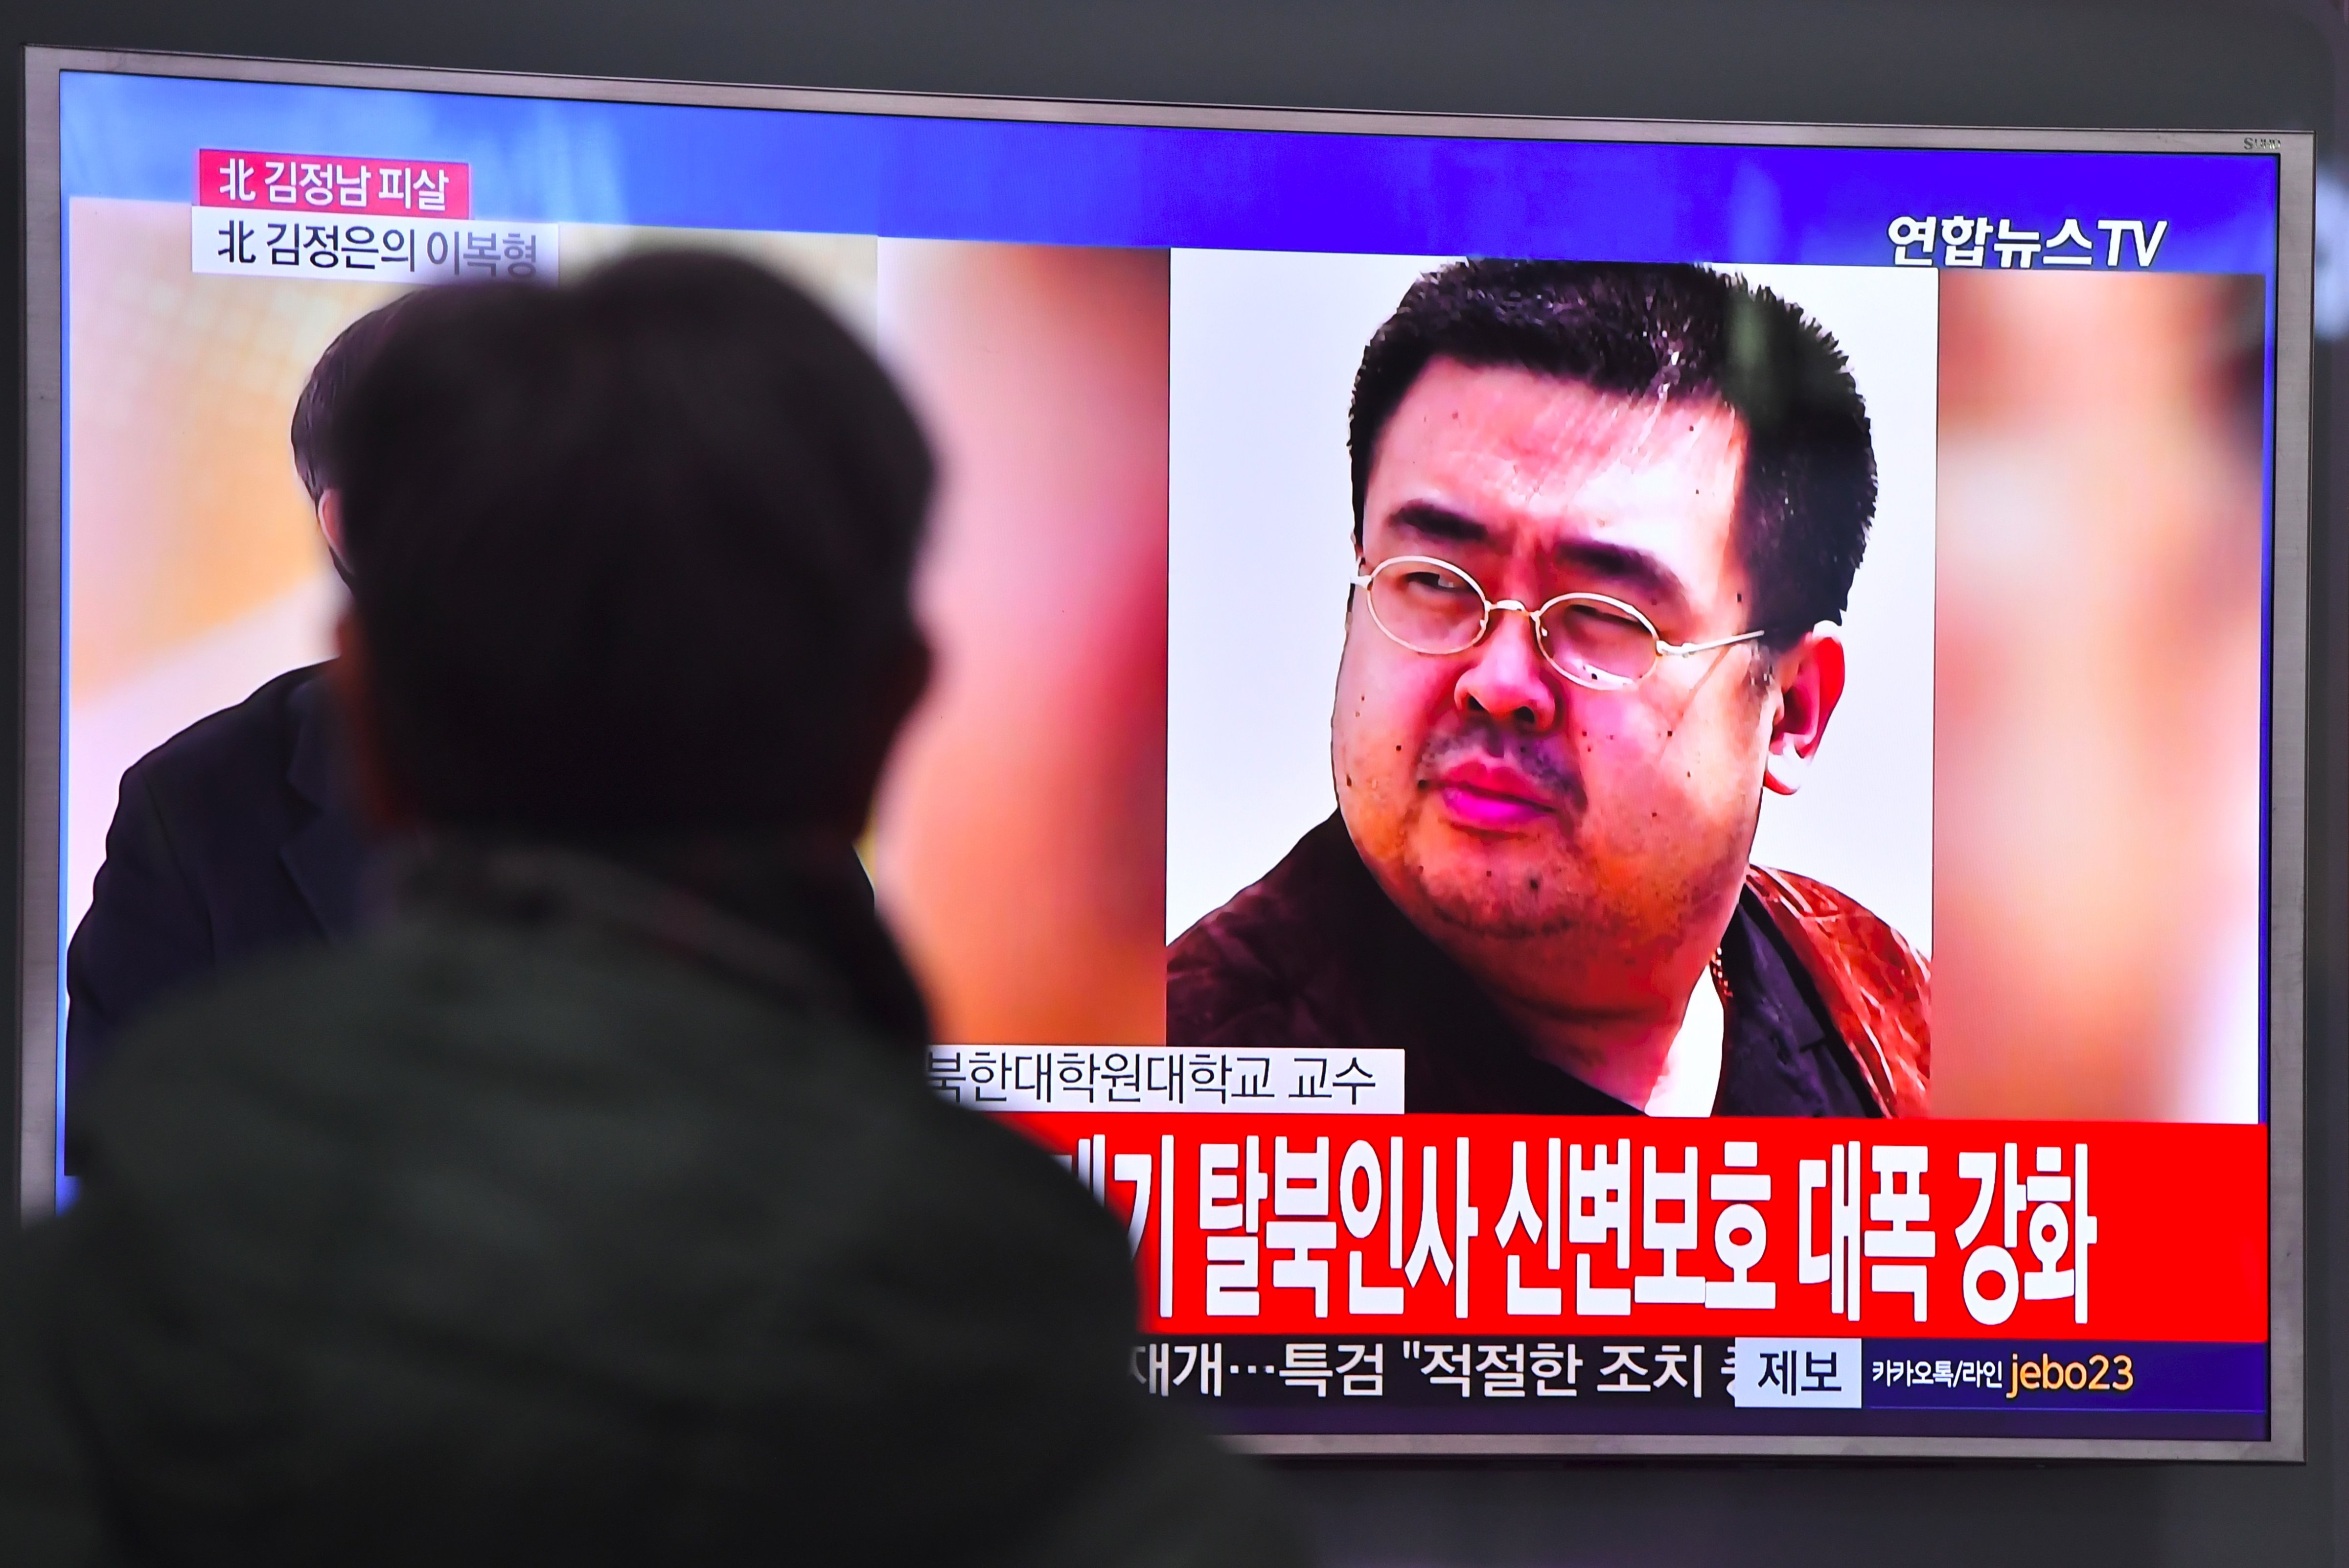 A news reports of Kim Jong-Nam, the half-brother of North Korean leader Kim Jong-Un, in Seoul on Feb. 14, 2017. (Jung Yeon-je—AFP/Getty Images)